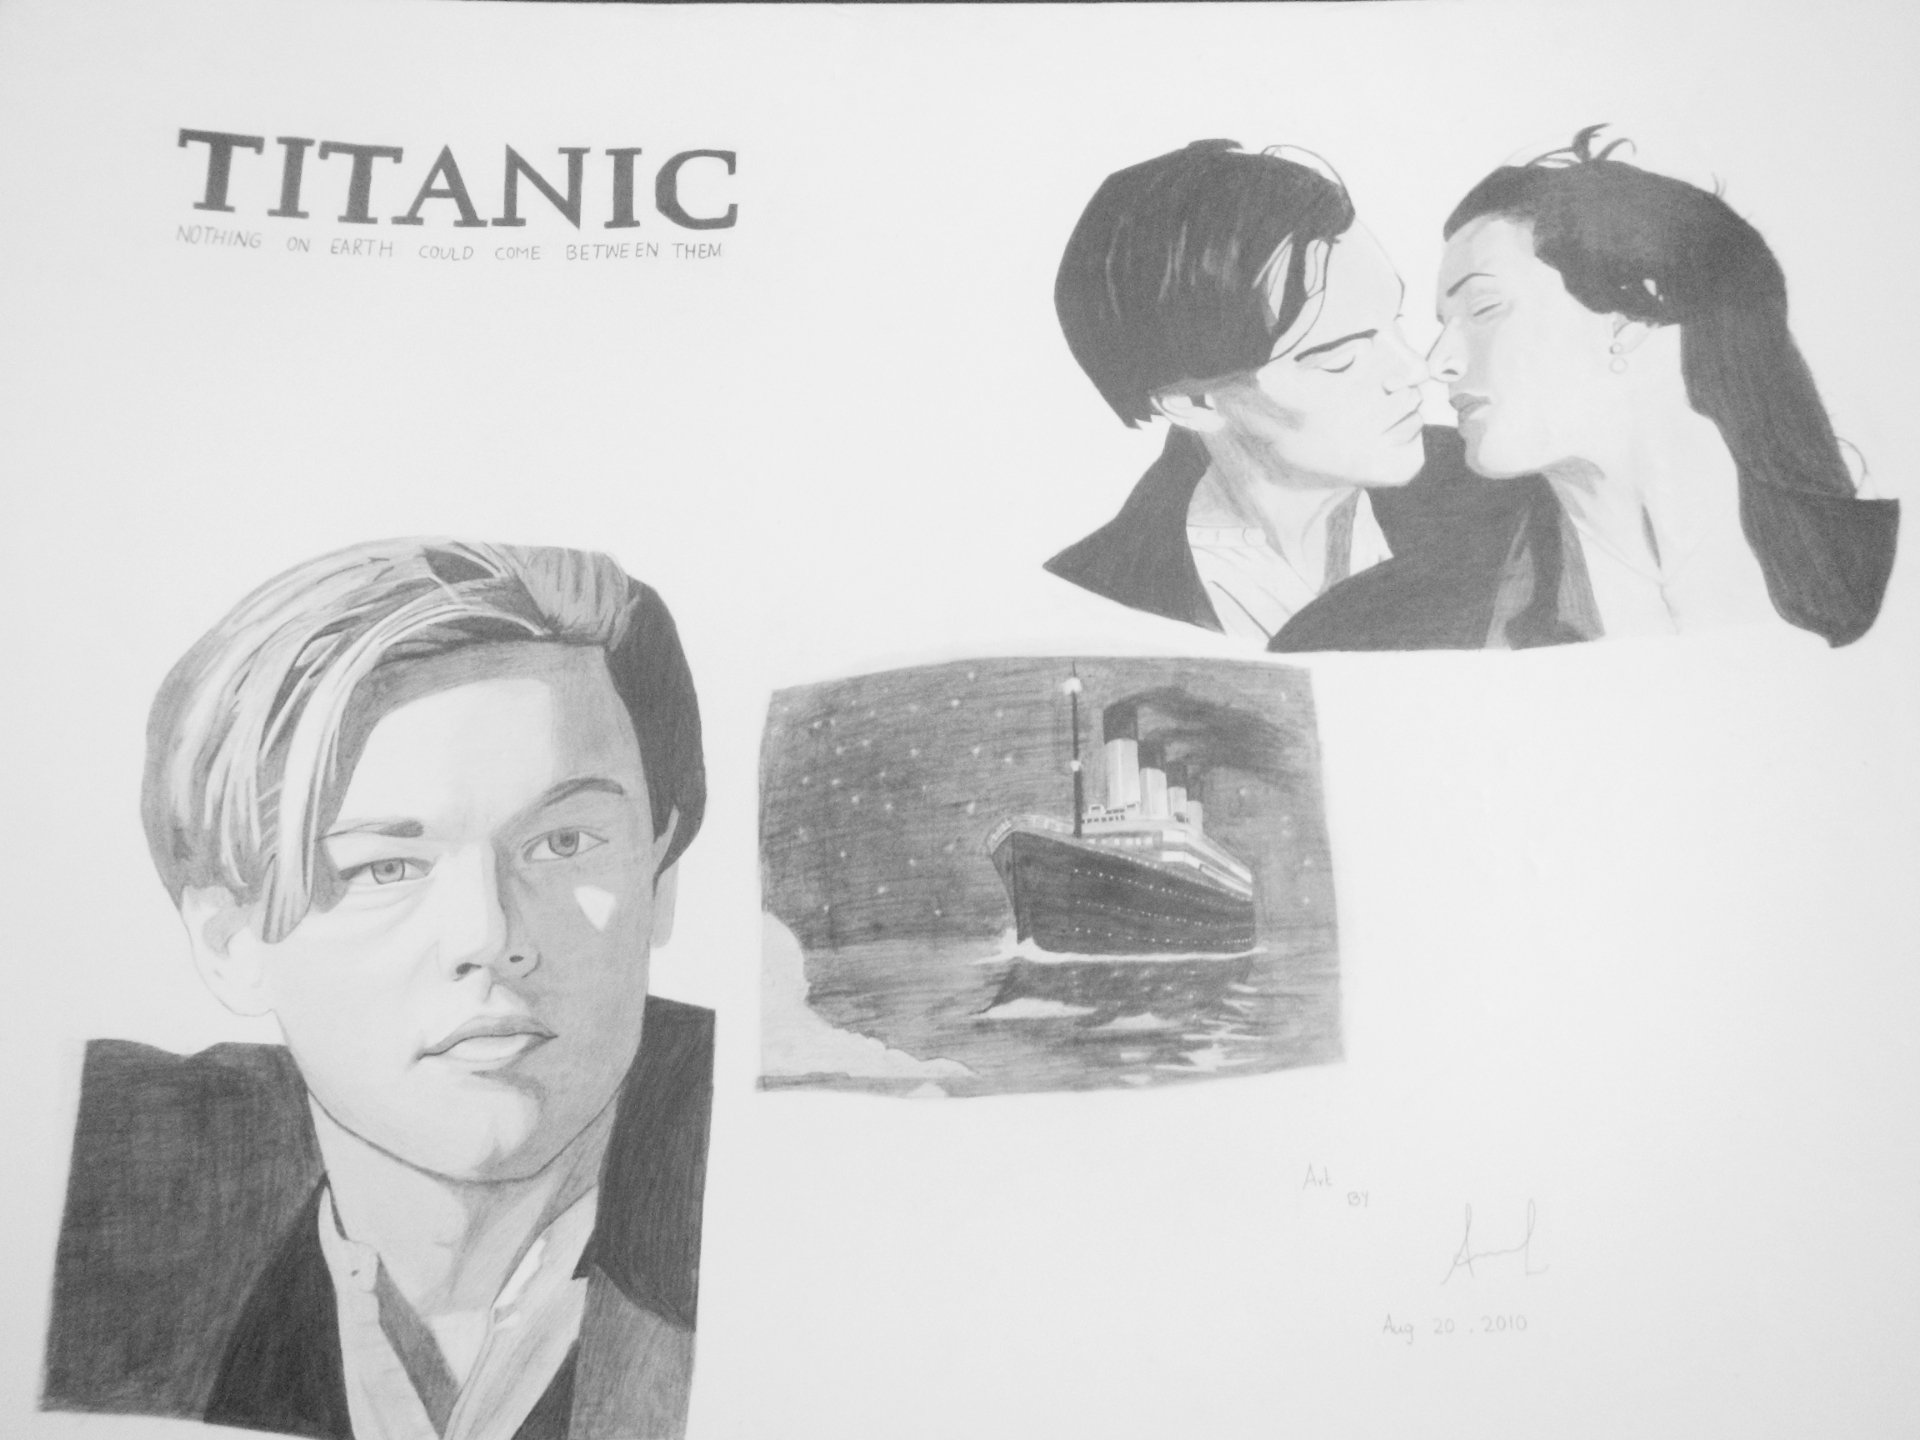 Buy Down the River Lagan Titanic Pencil Drawing Print Online in India  Etsy